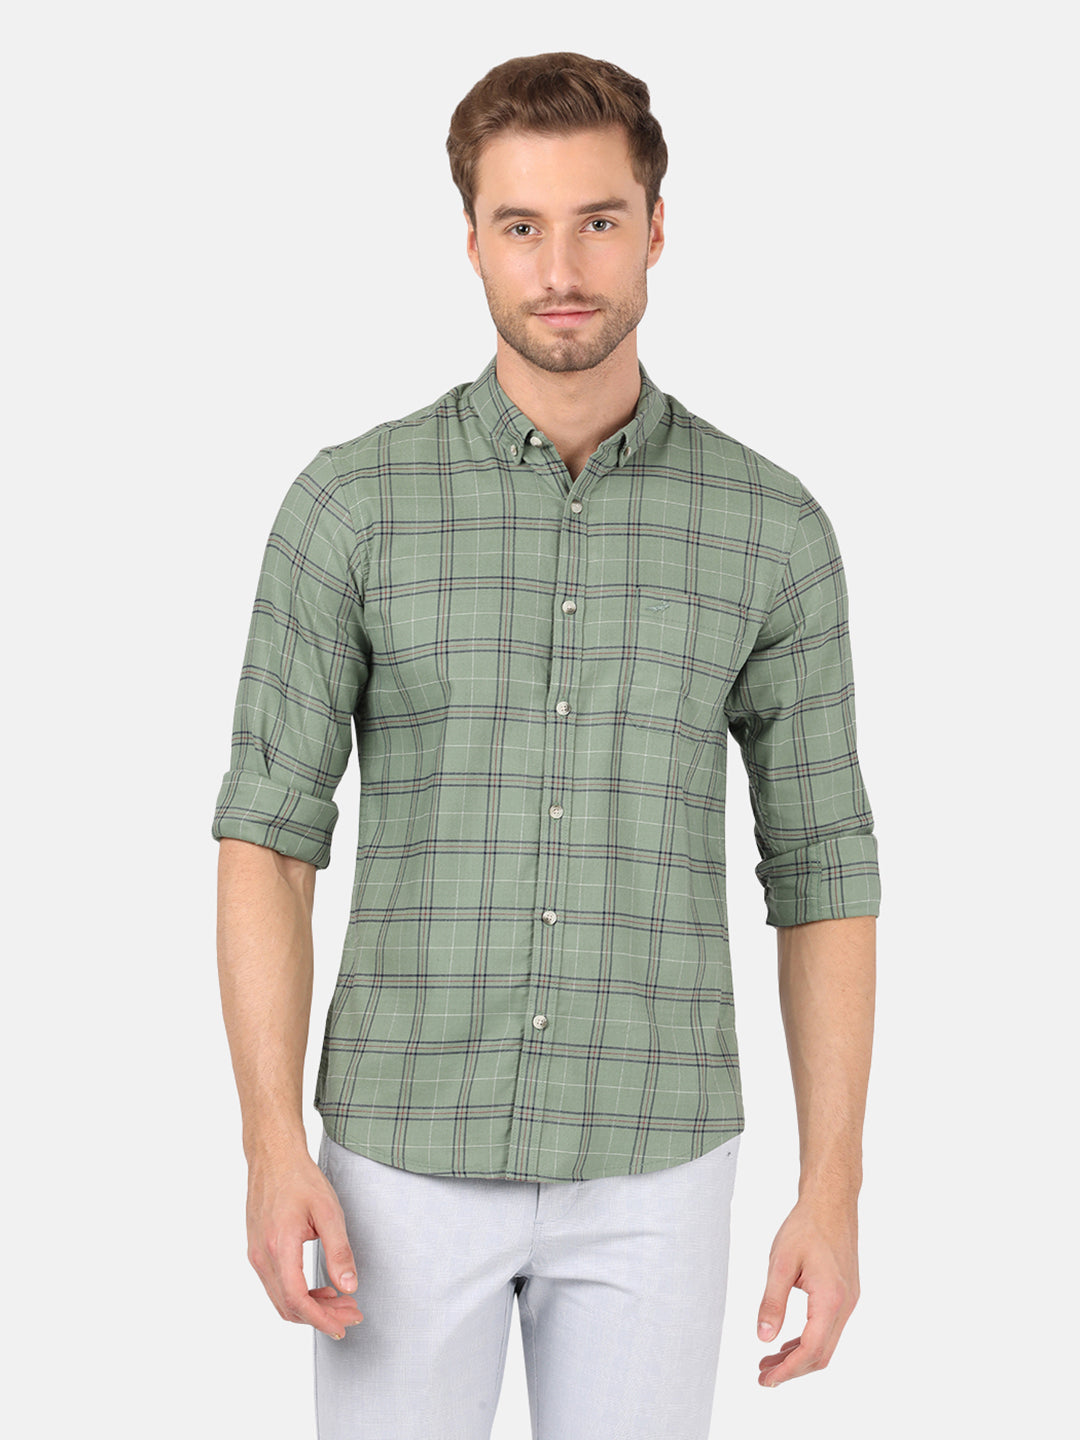 Crocodile Casual Full Sleeve Slim Fit Checks Green with Collar Shirt for Men